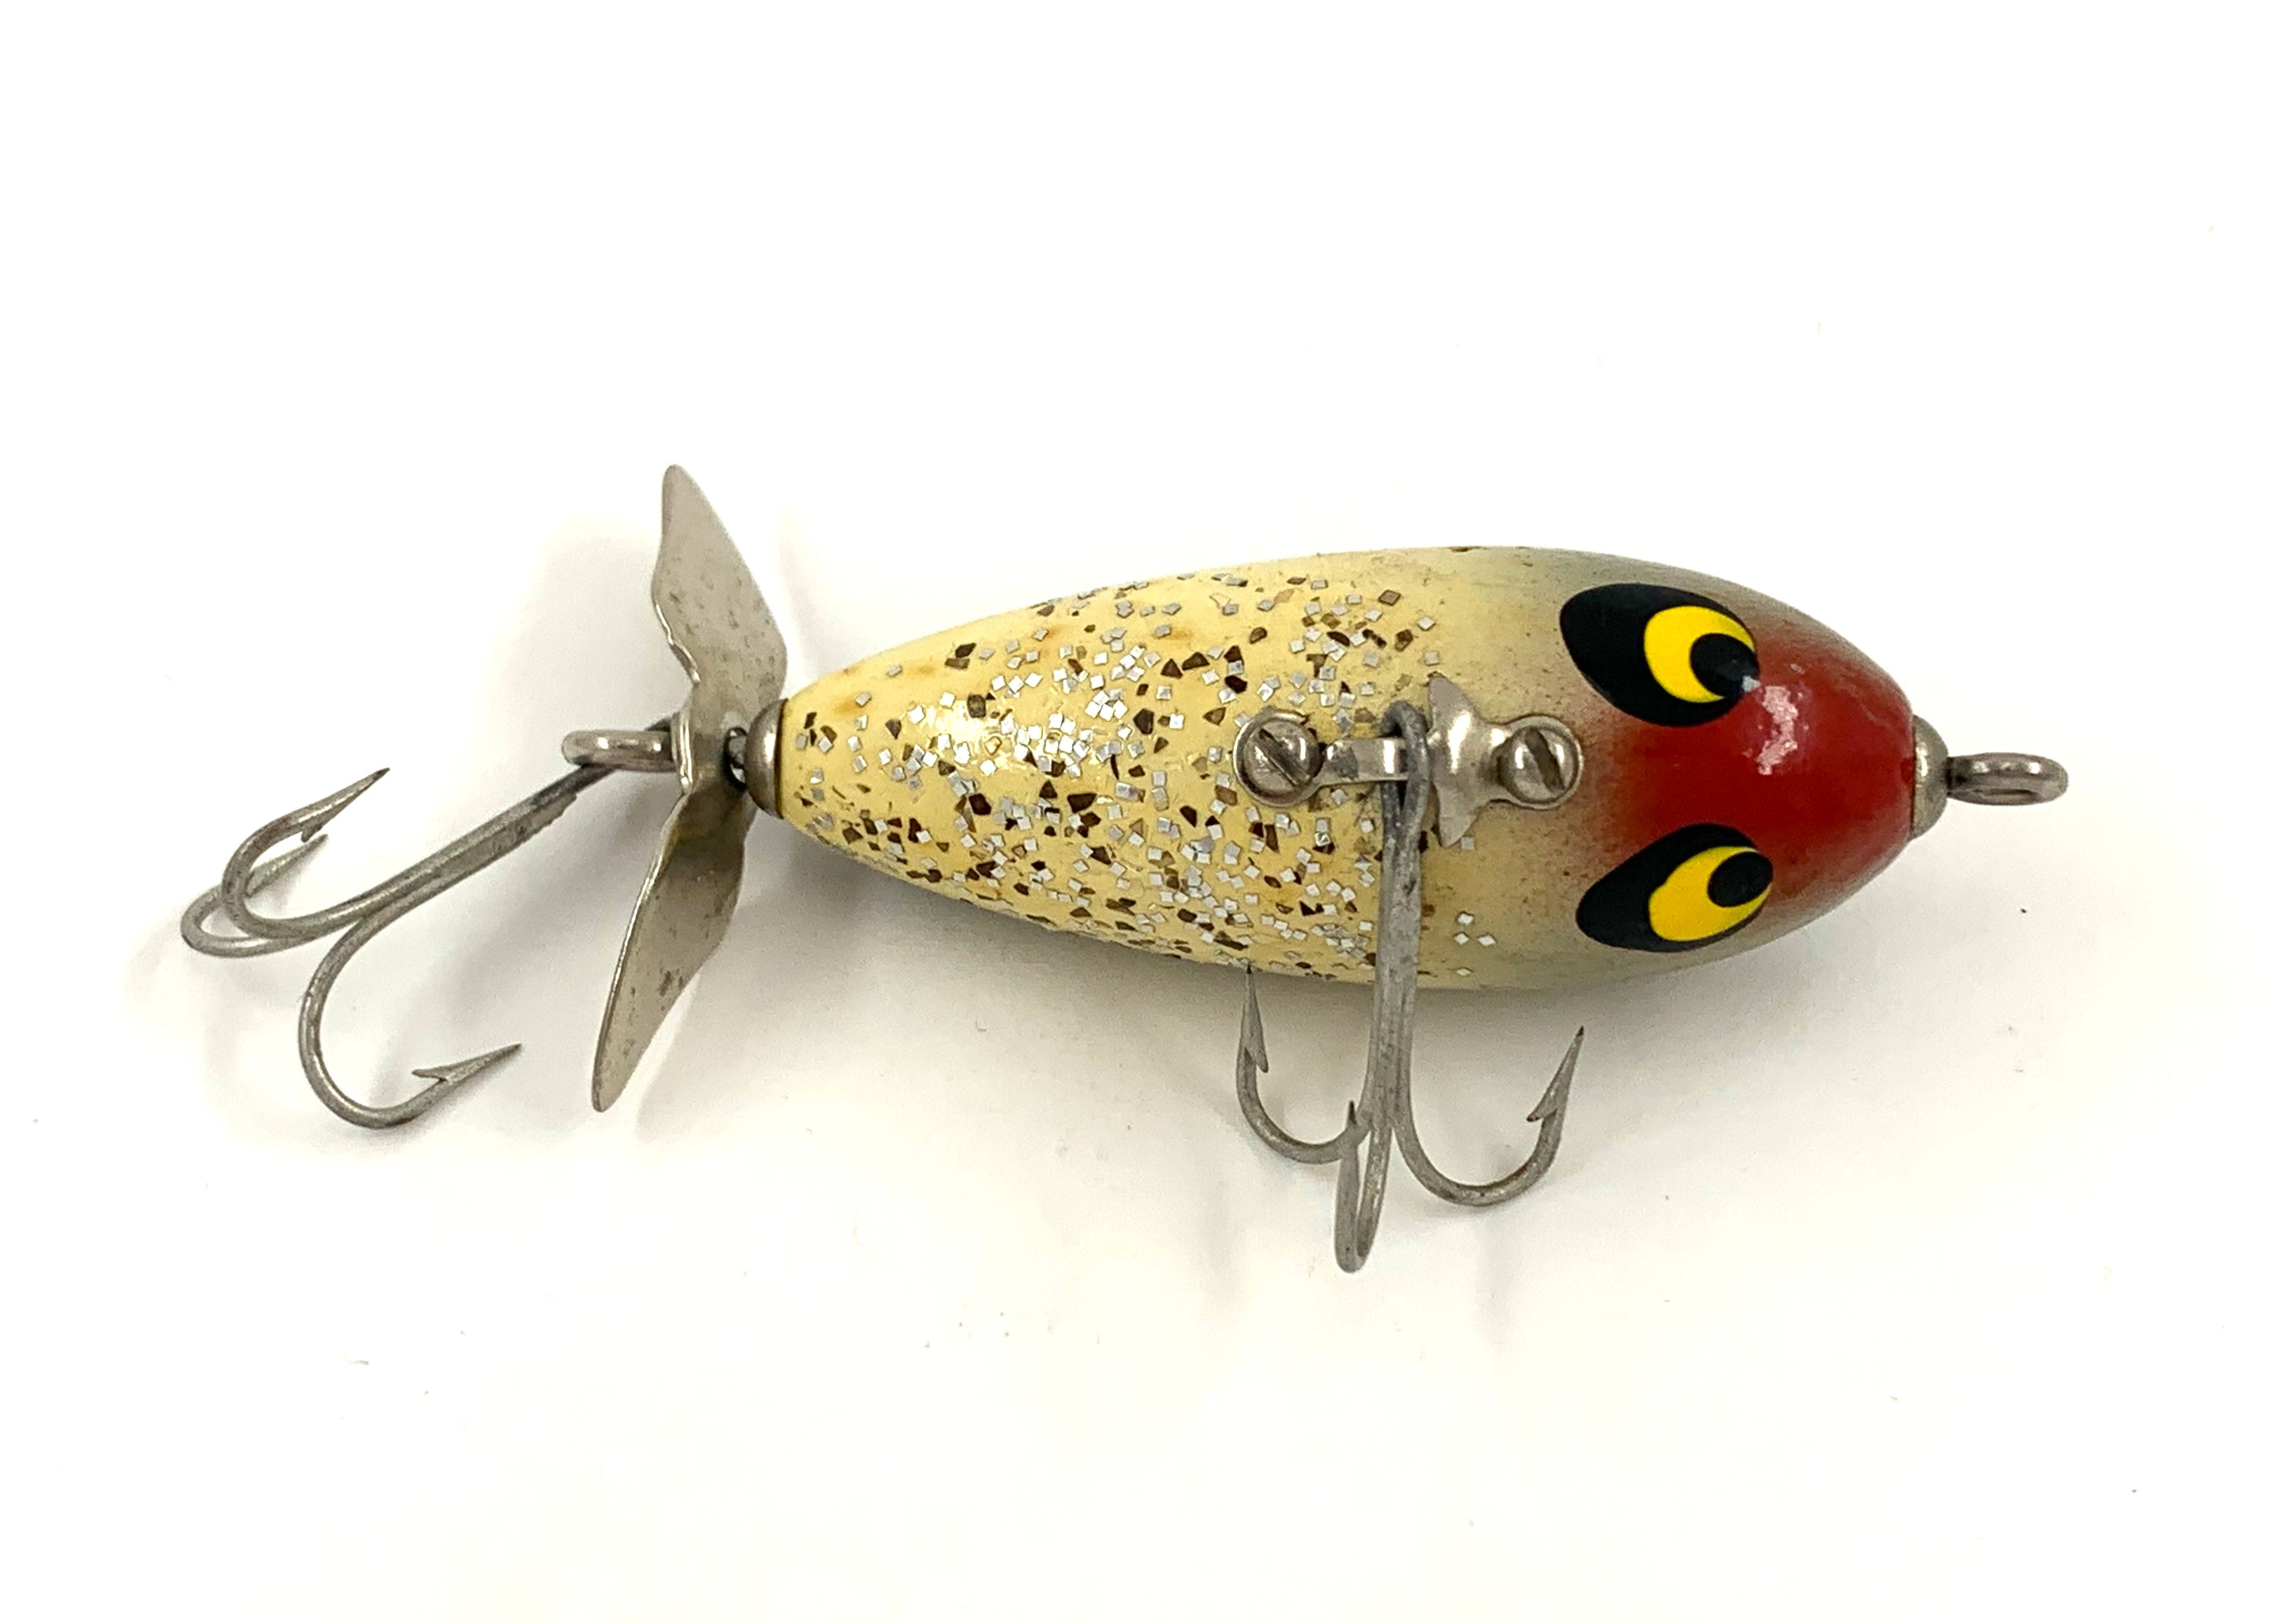 SMITHWICK LURES CARROT TOP Wood Fishing Lure • BLACK SHINER – Toad Tackle